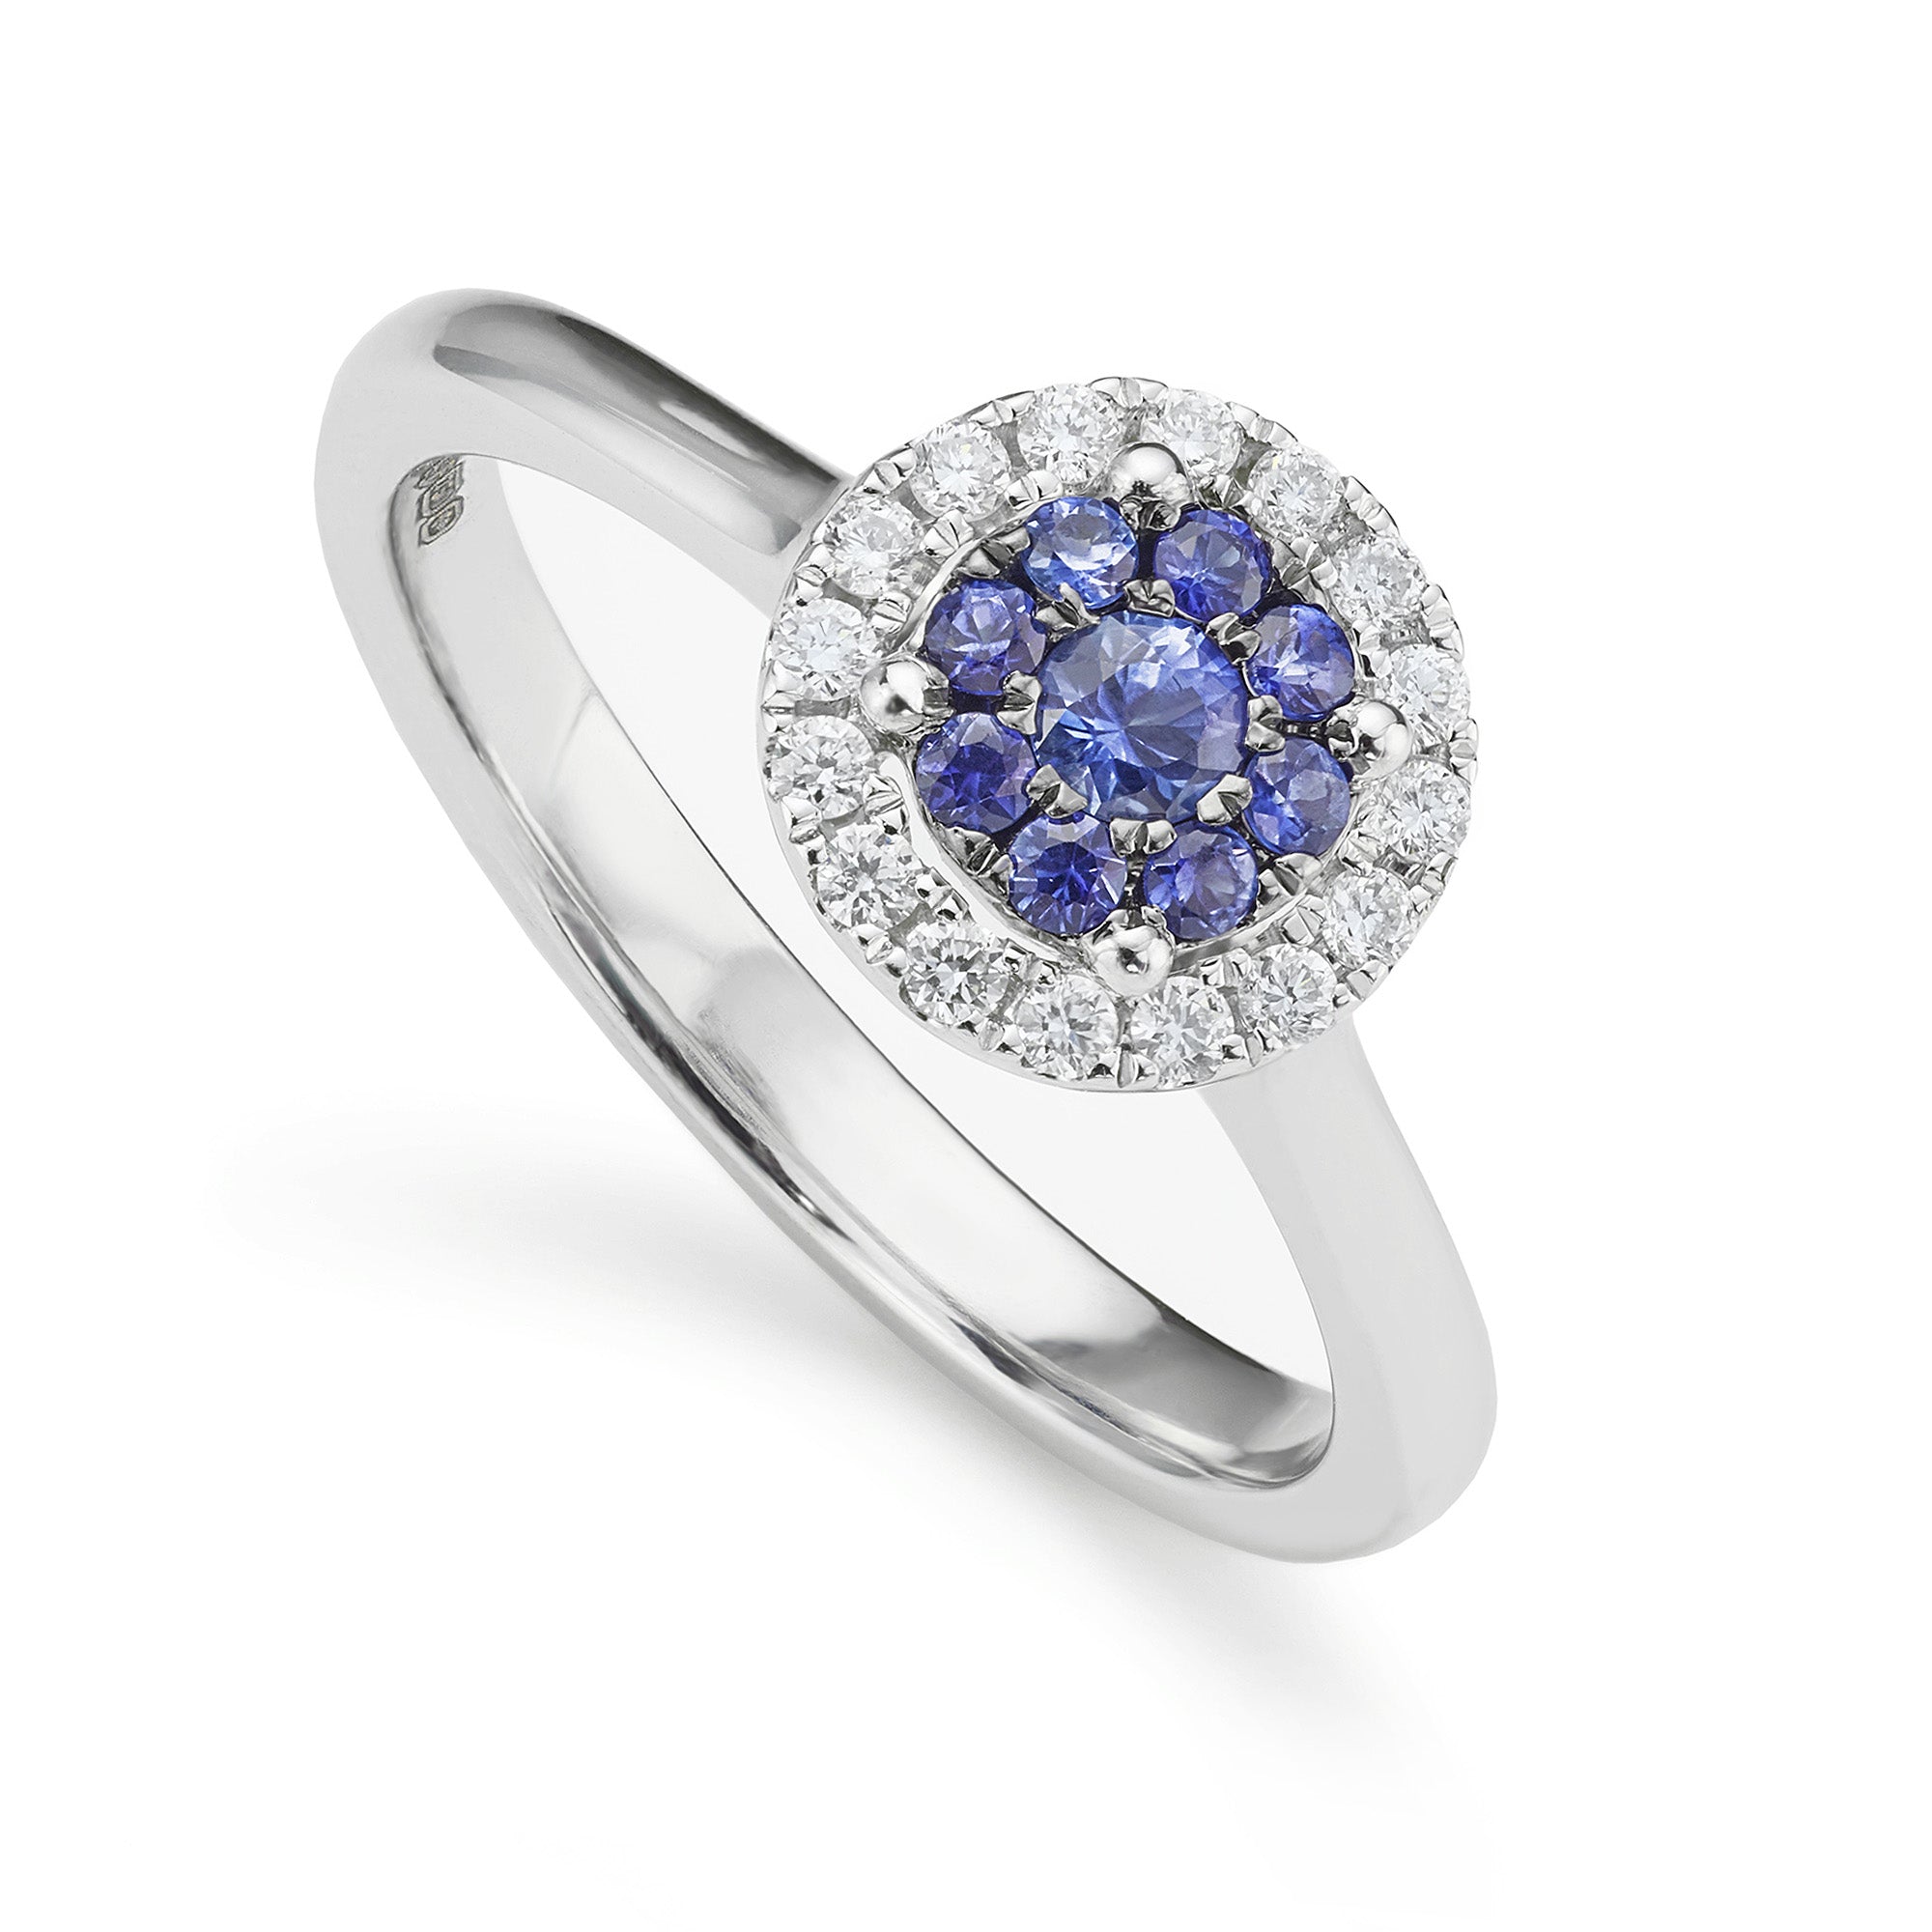 Blue sapphire and diamond cluster halo engagement ring